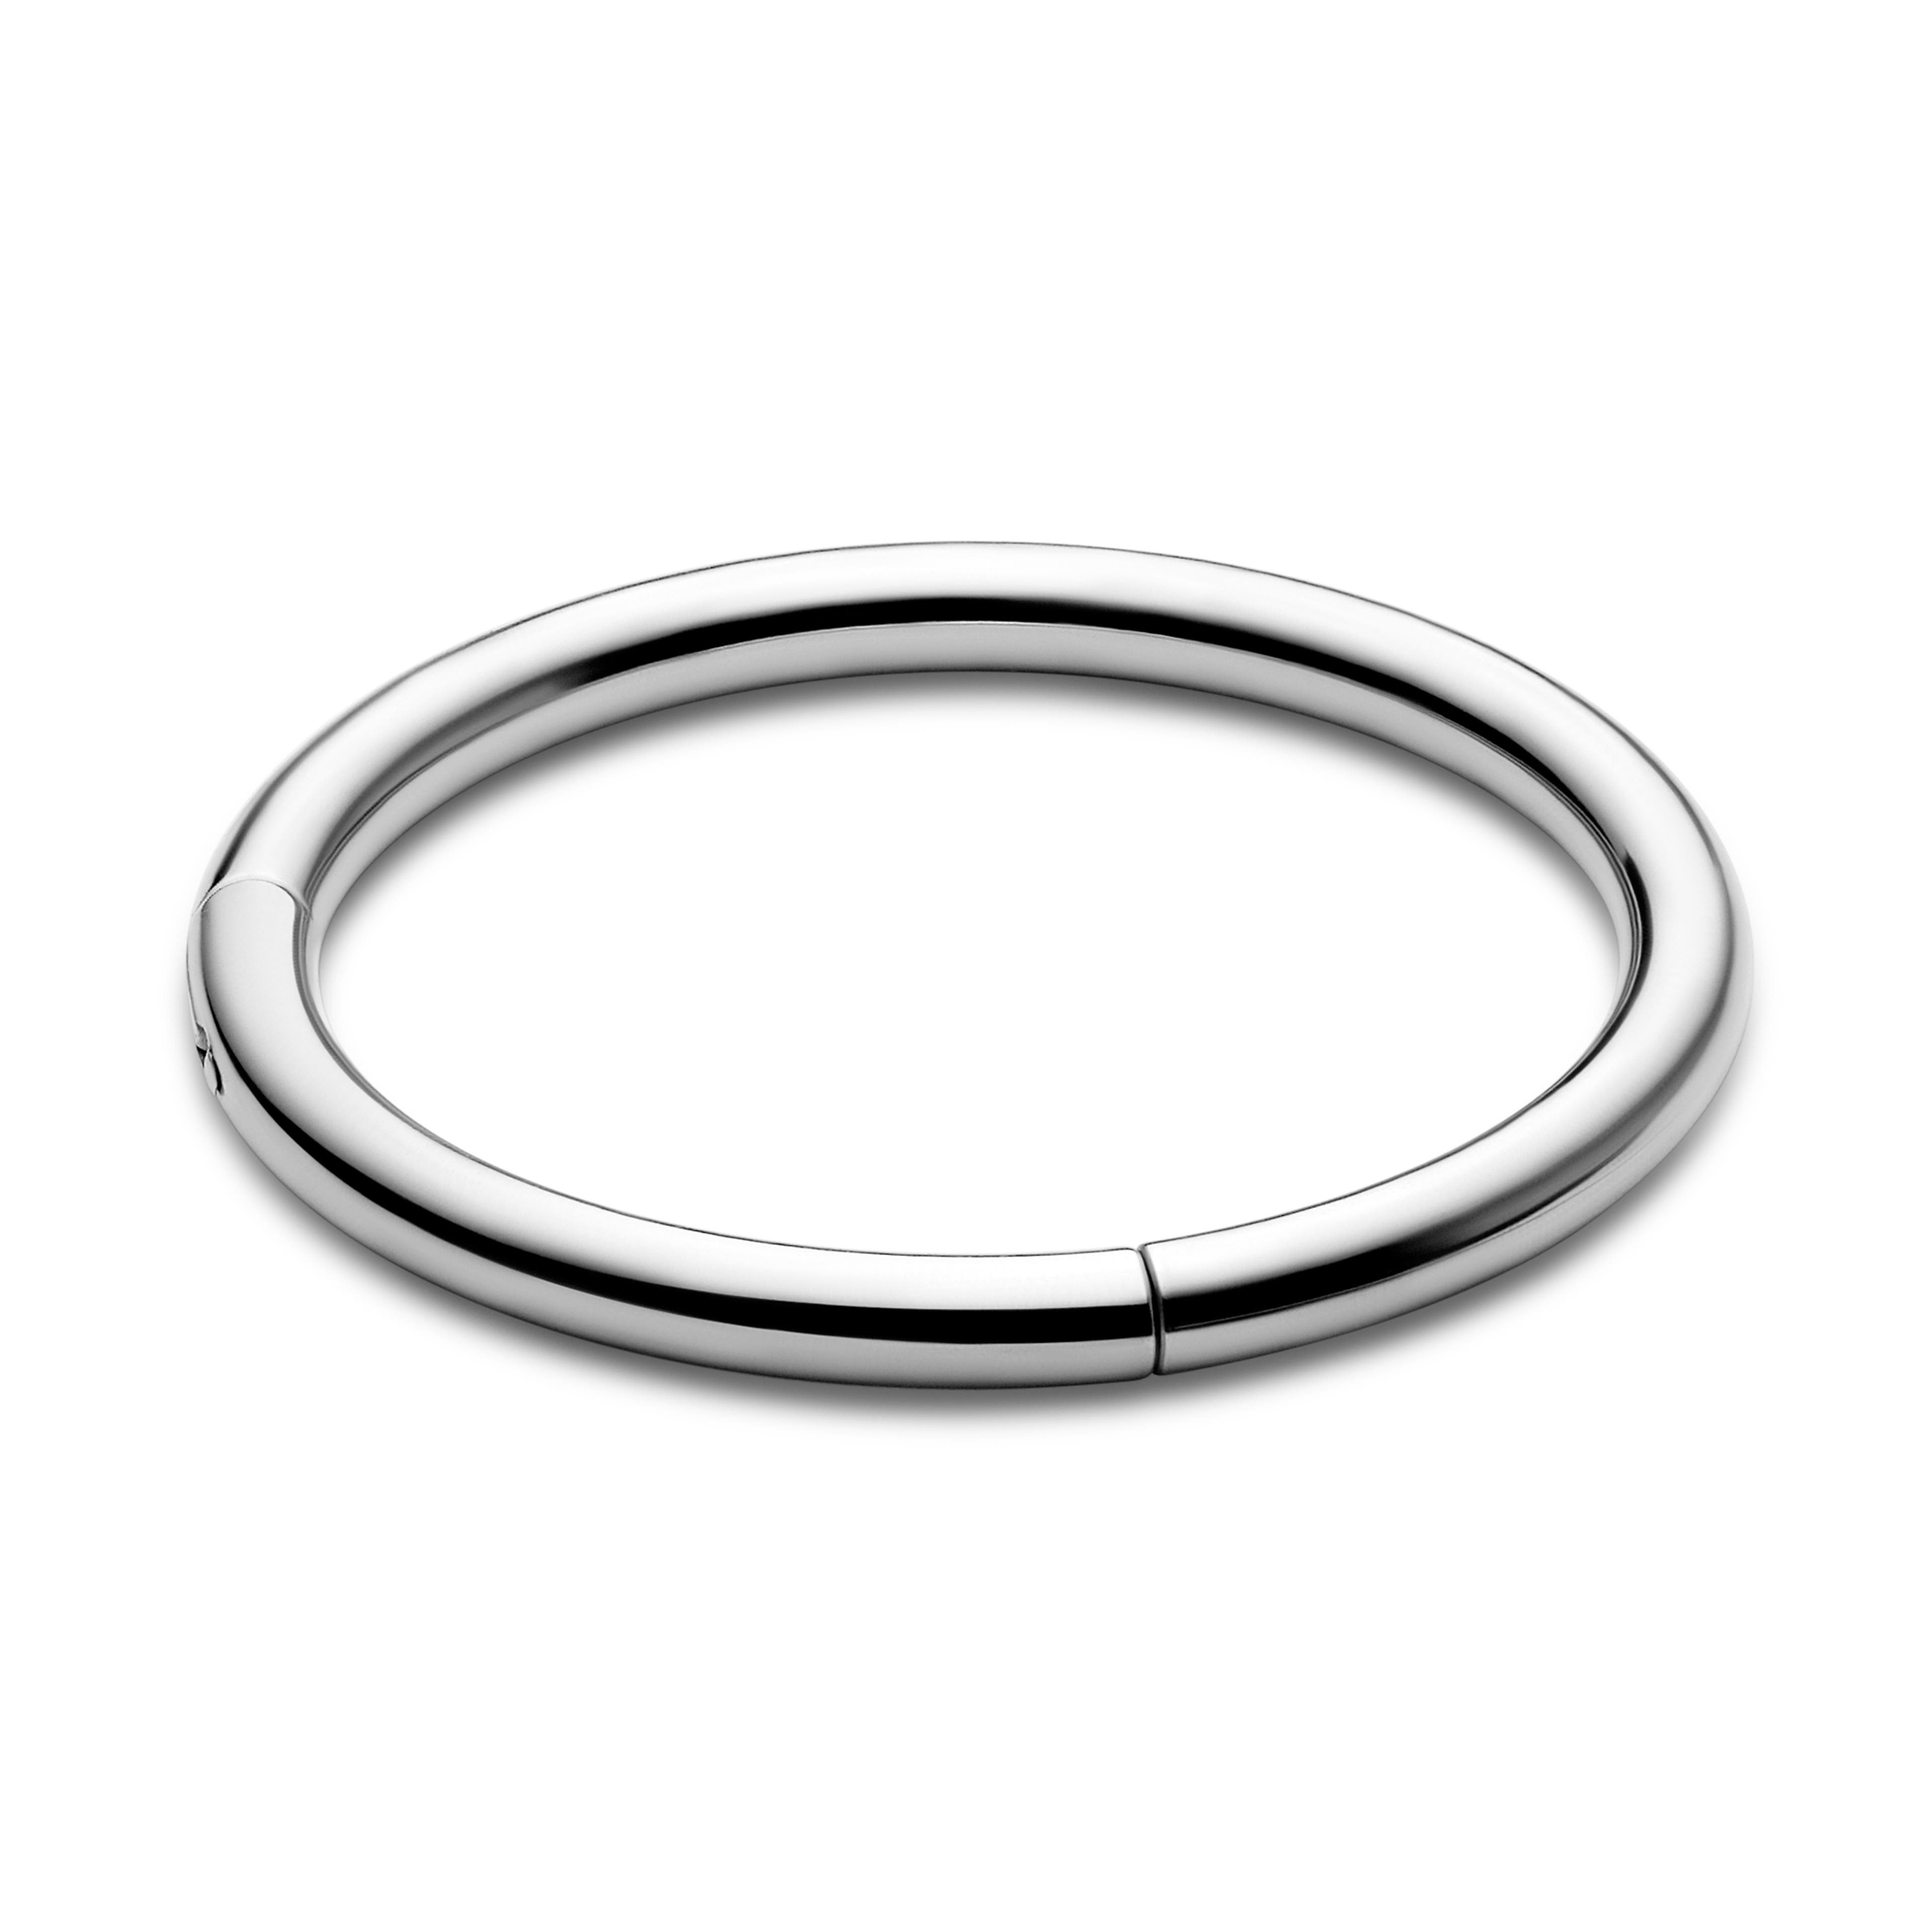 1/3" (9 mm) Silver-tone Surgical Steel Piercing Ring